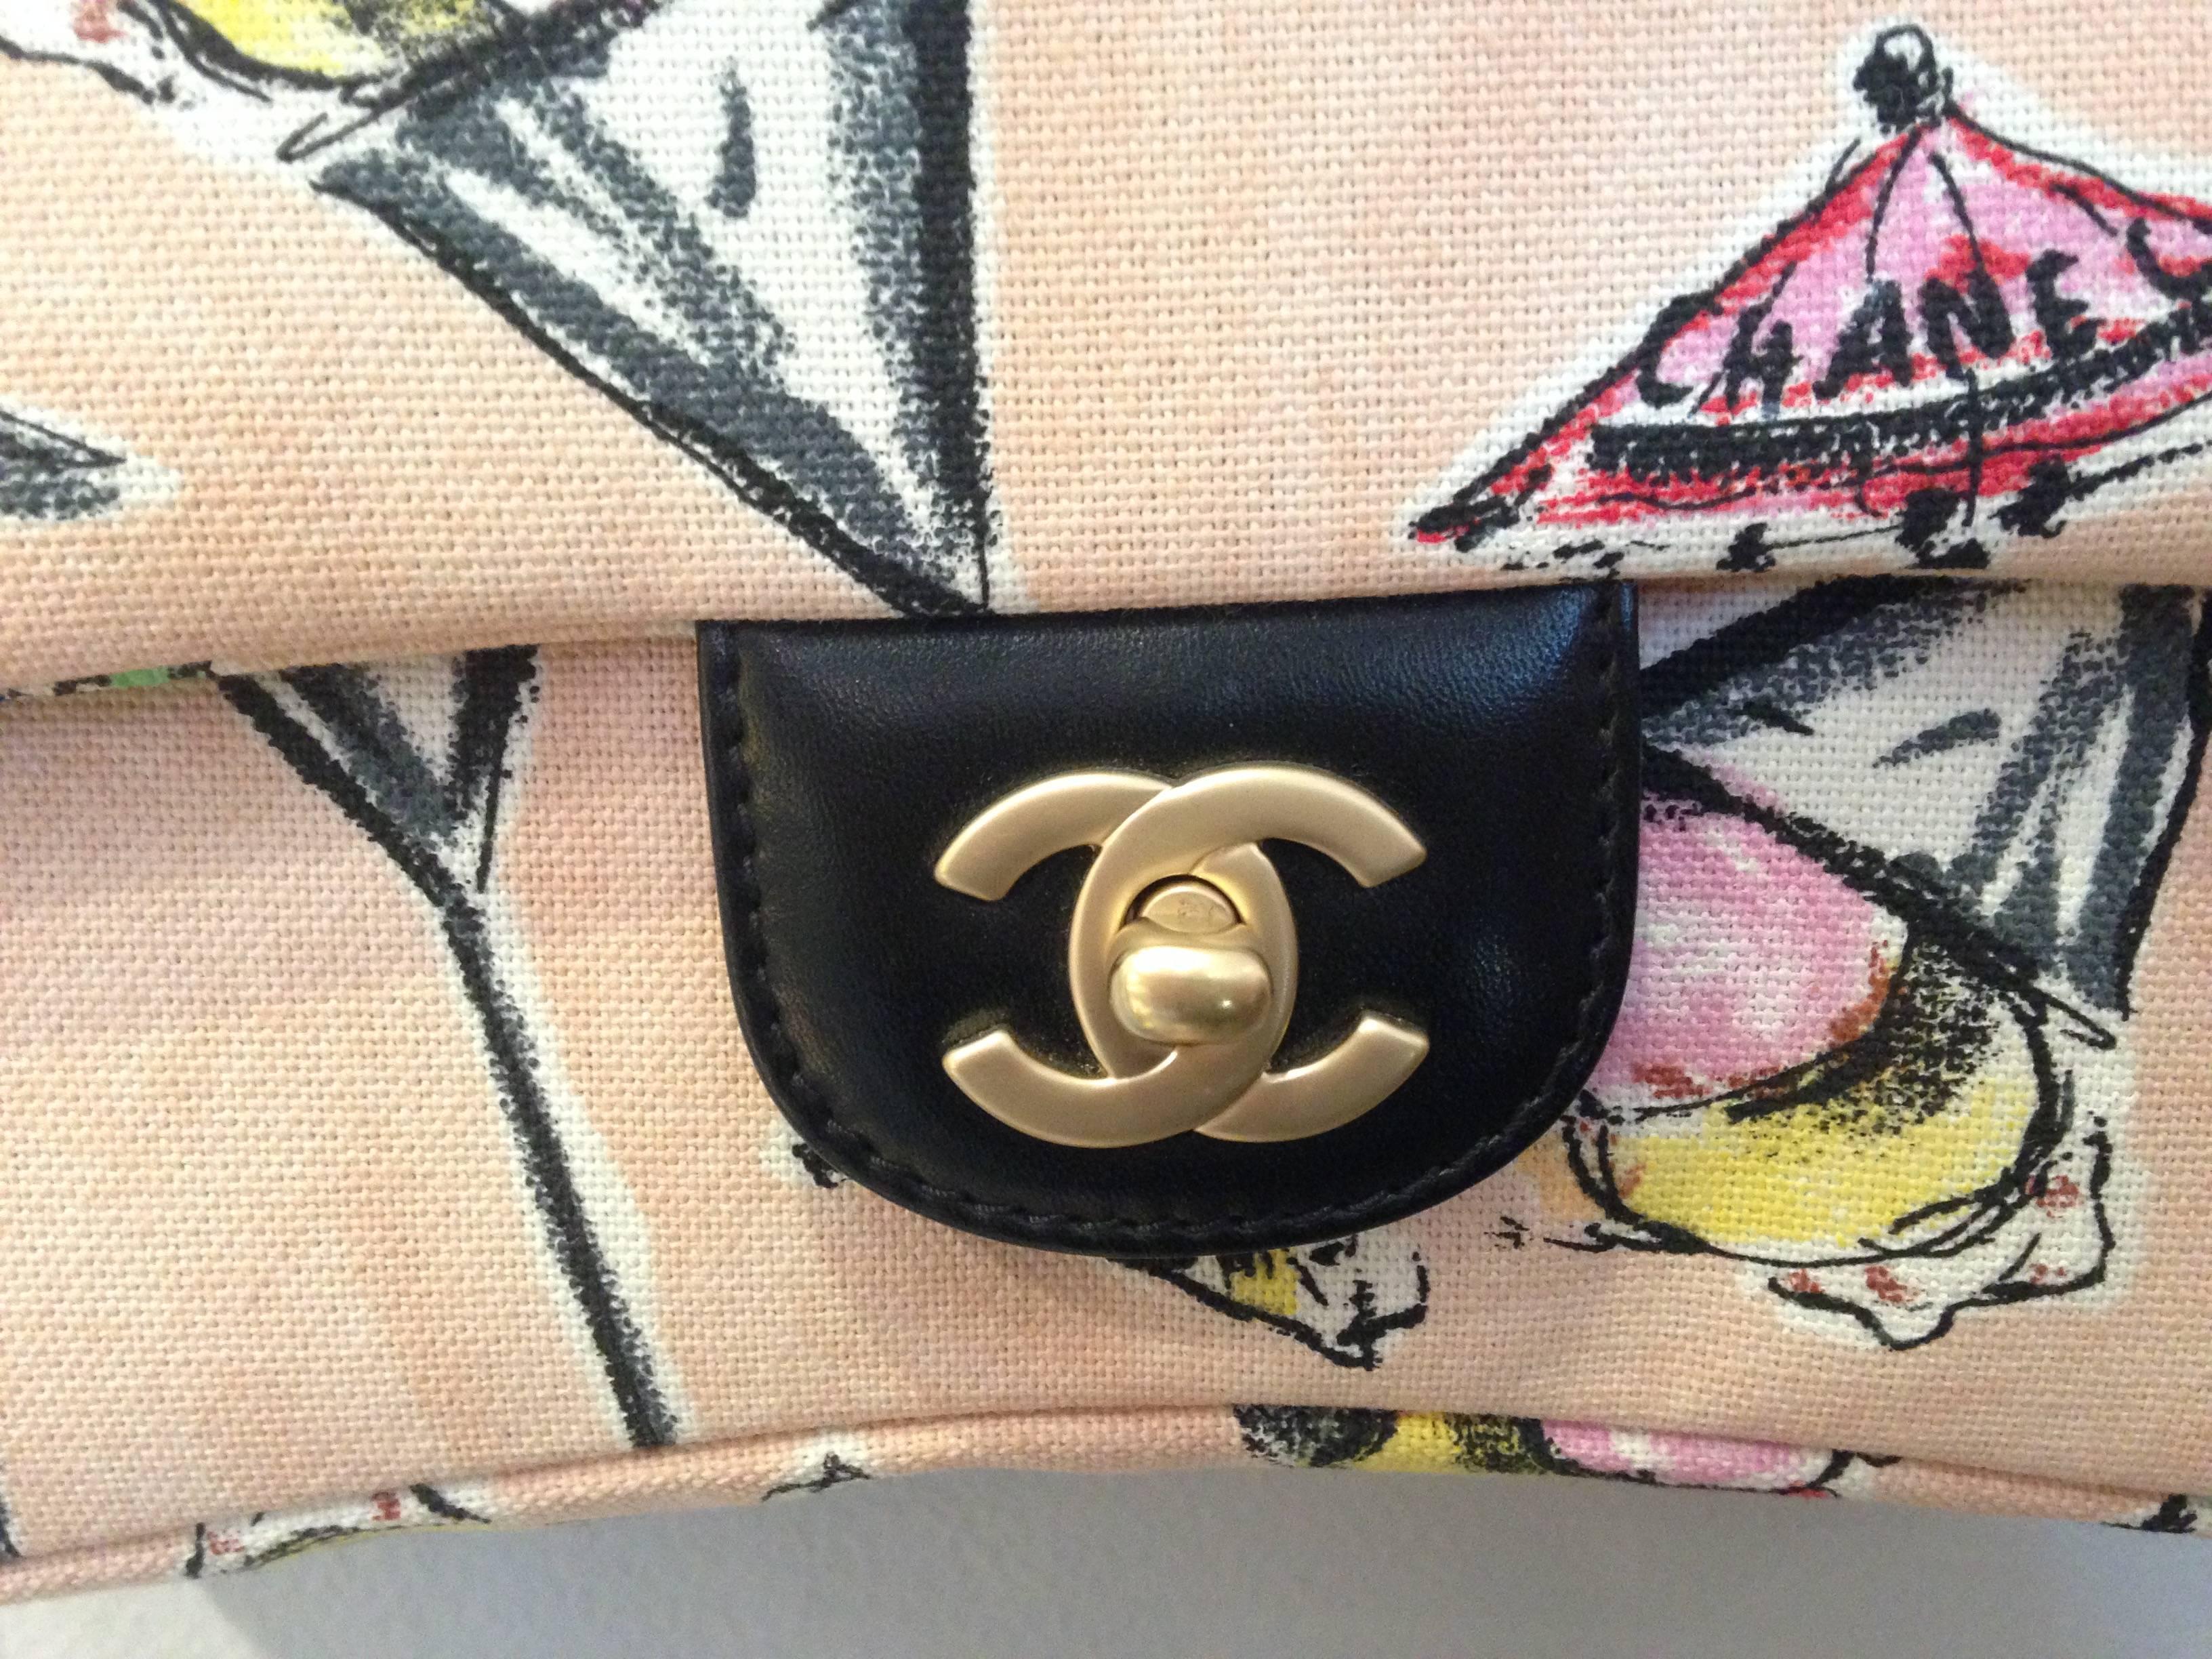 For sale an amazing bag in excellent condition form the 2003-2004 Chanel cruise collection Rose Bonbon.

Size 25 centimters

Excellent condition with its card and hologramme.

Double C clasp.